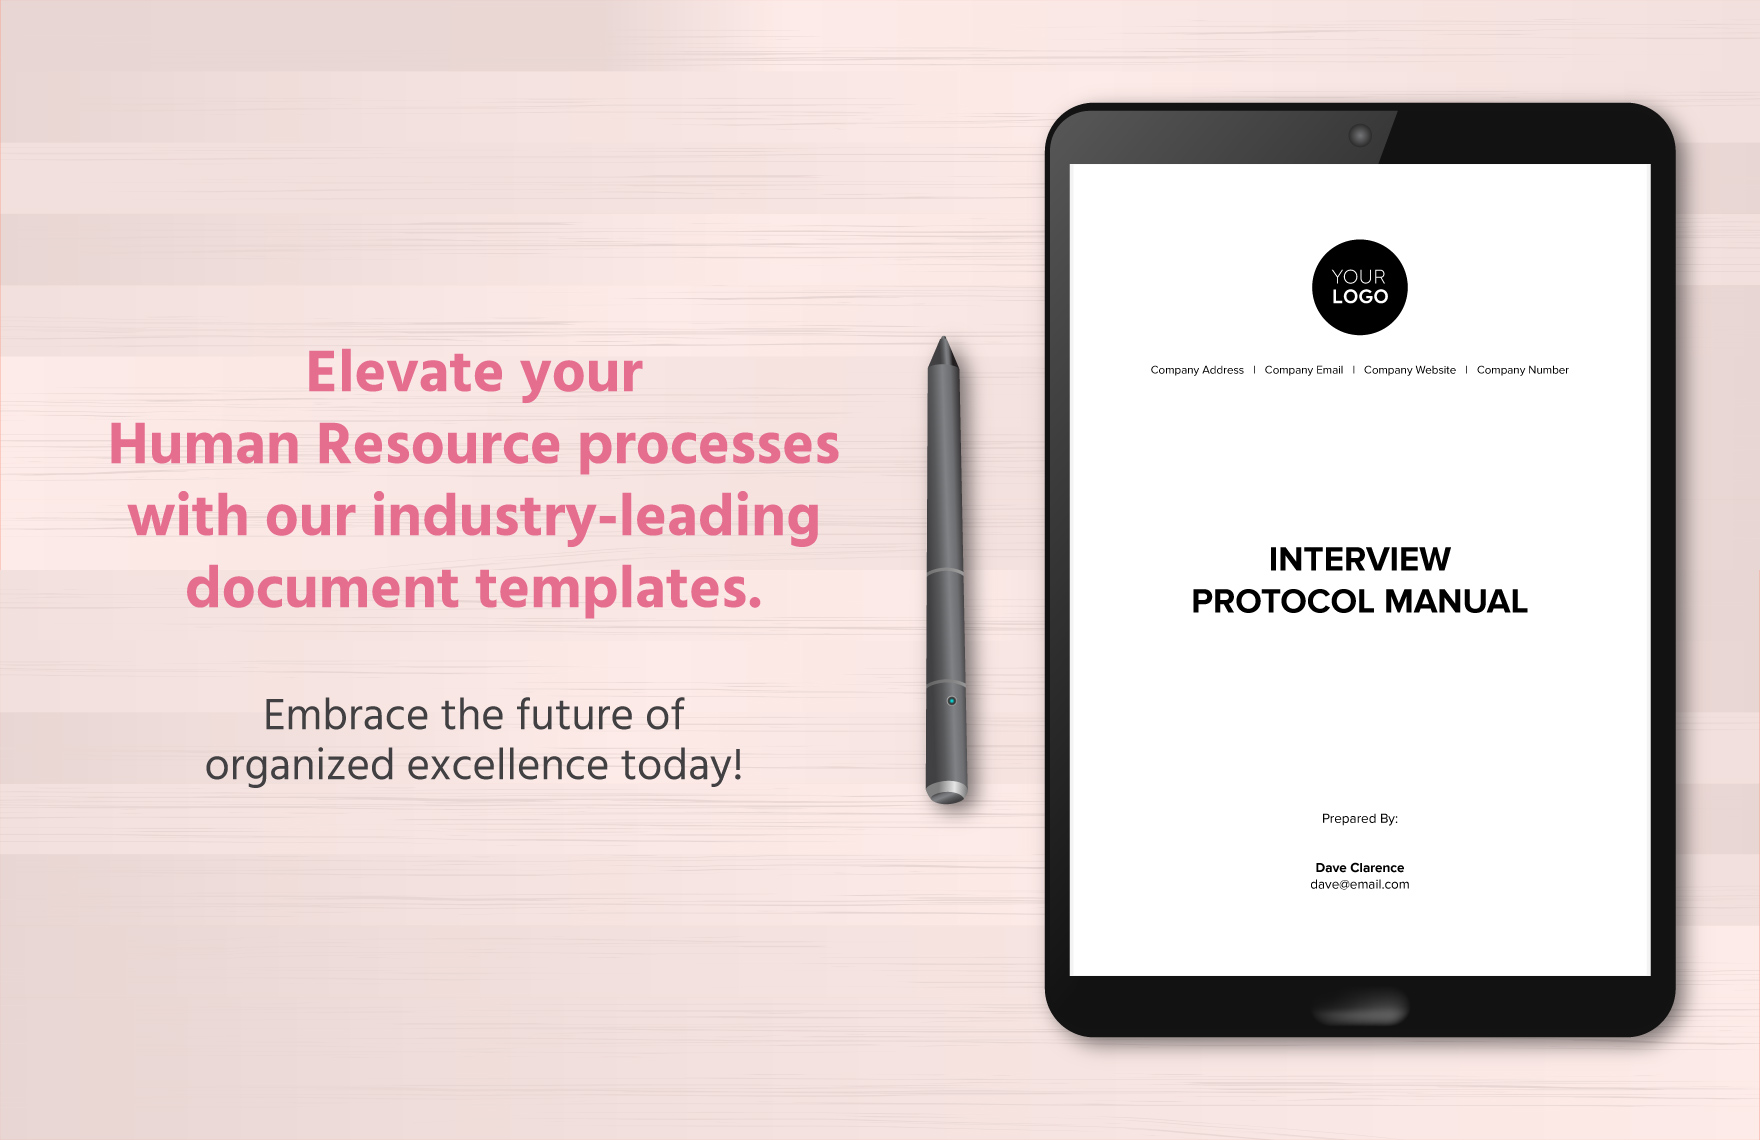 Interview Protocol Manual HR Template